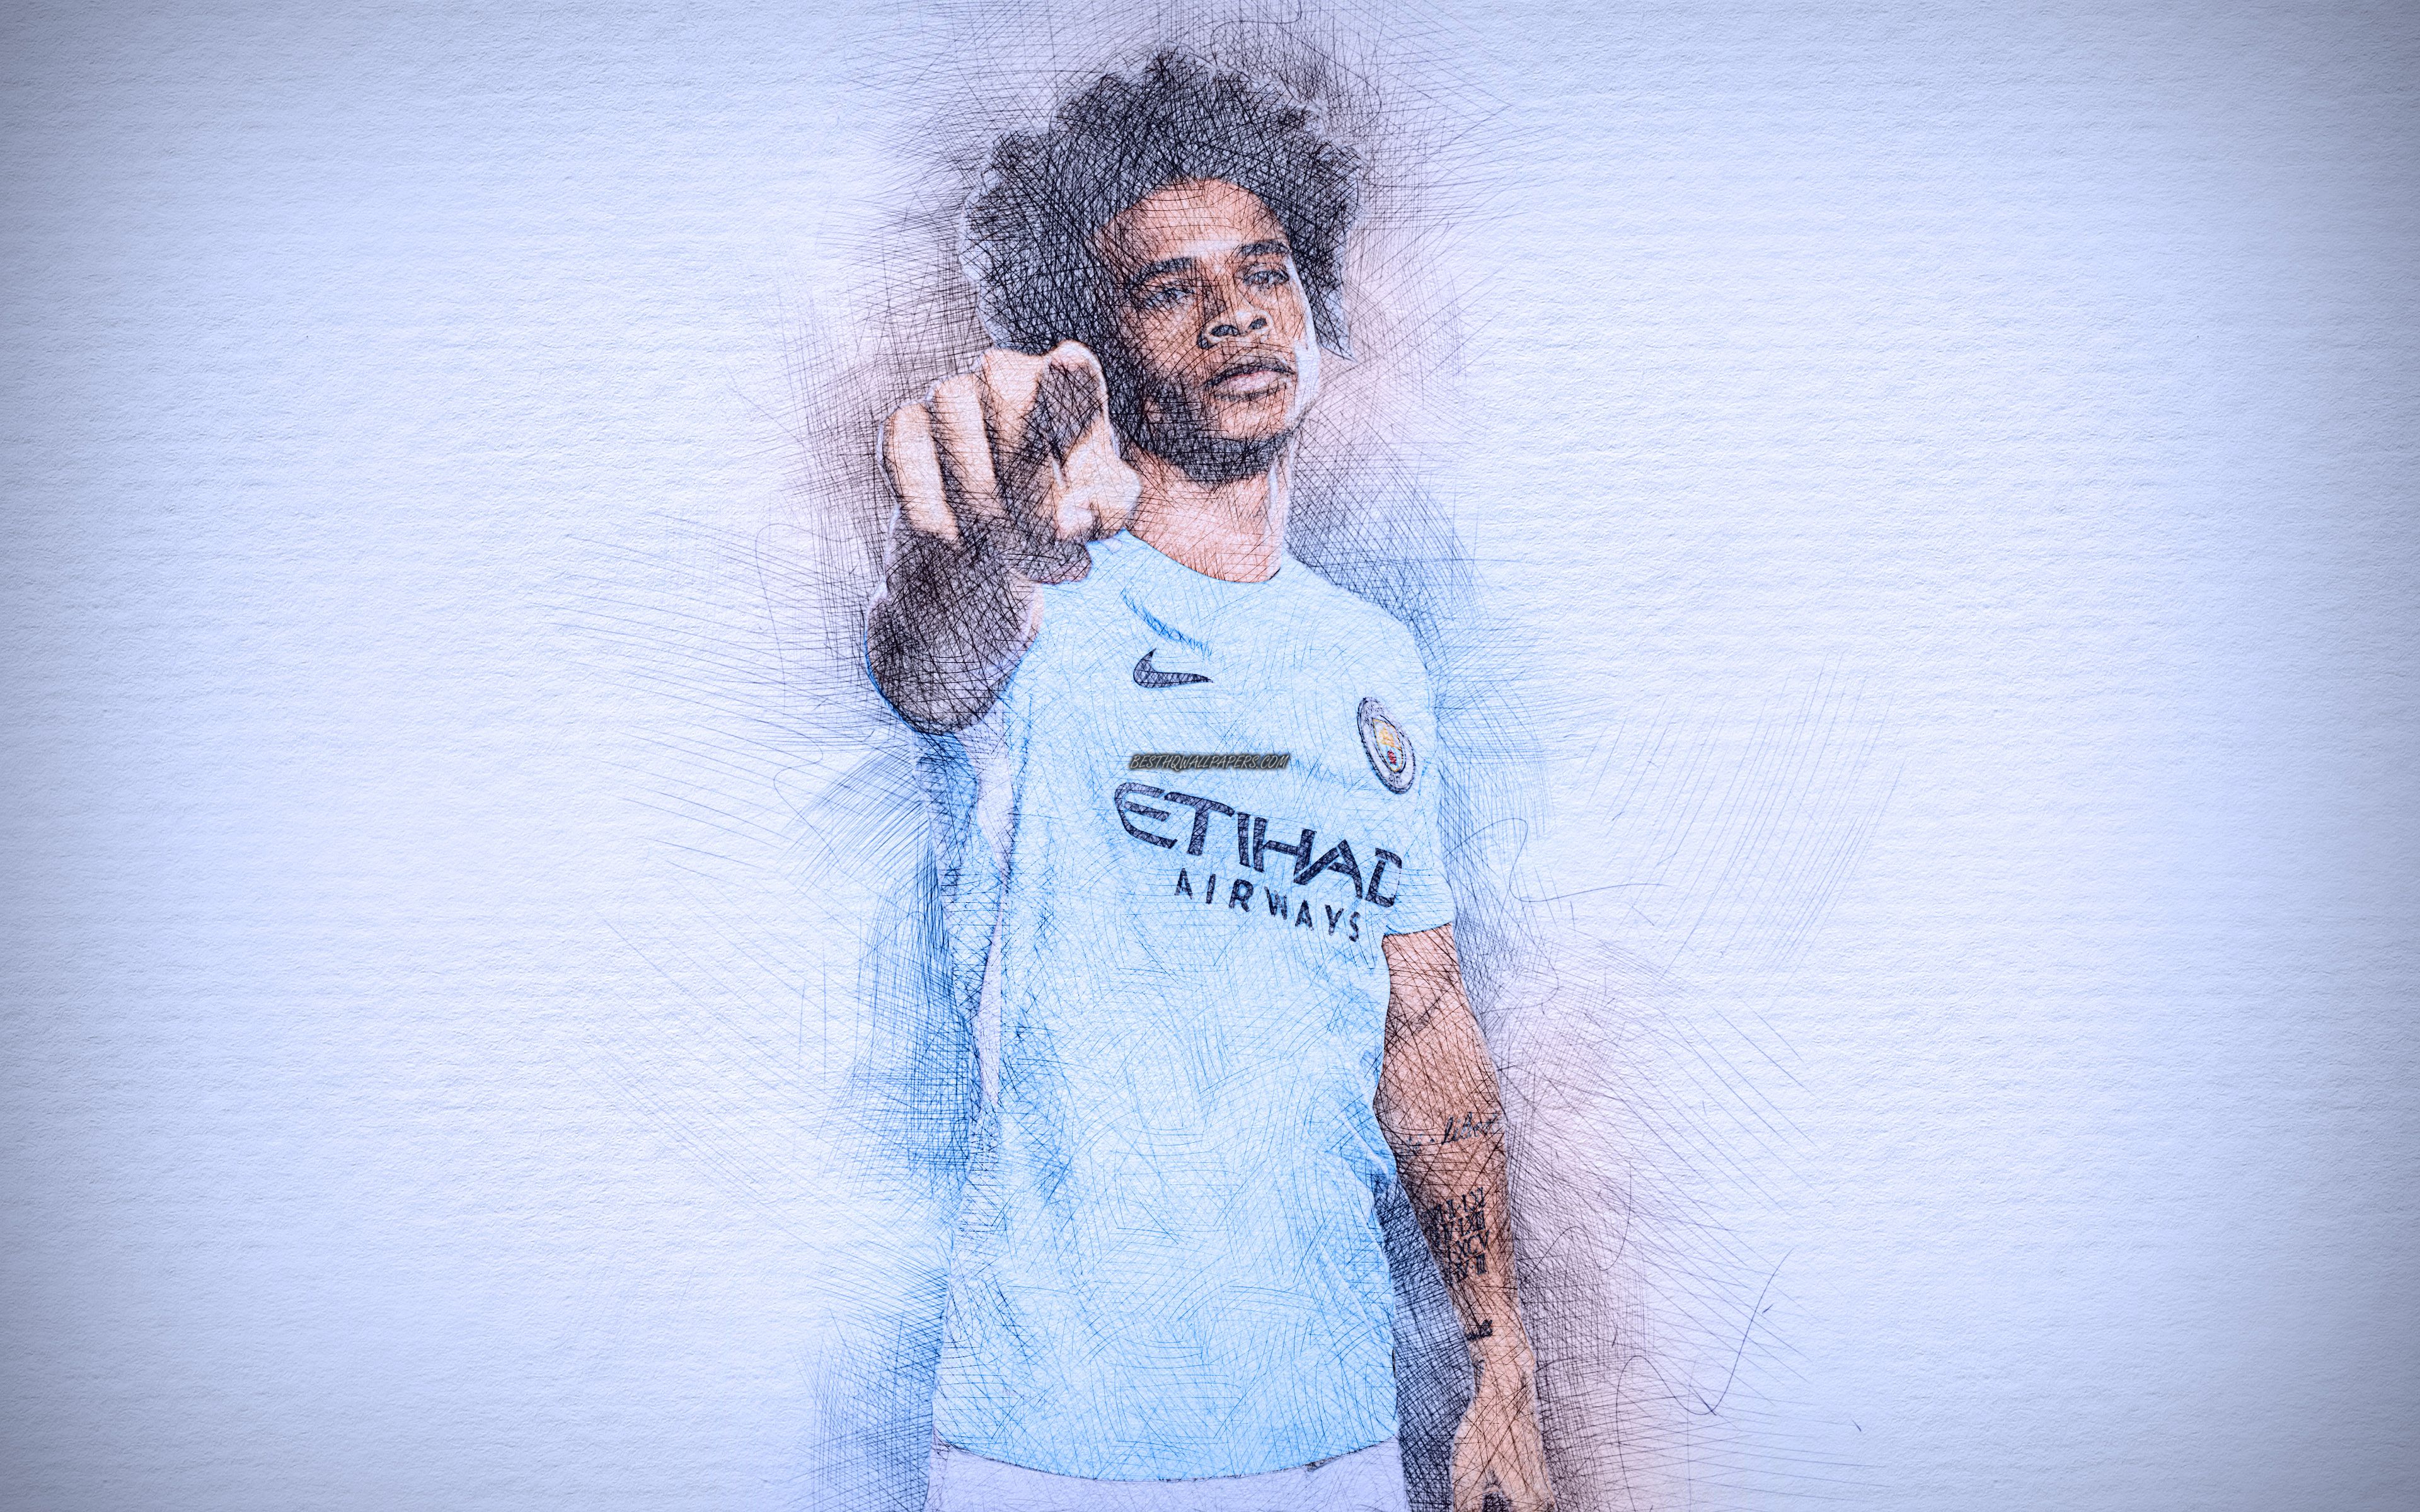 Download wallpaper Leroy Sane, 4k, artwork, football stars, Manchester City, Aguero, soccer, Premier League, Man City, footballers, drawing Sane, FC Manchester City for desktop with resolution 3840x2400. High Quality HD picture wallpaper